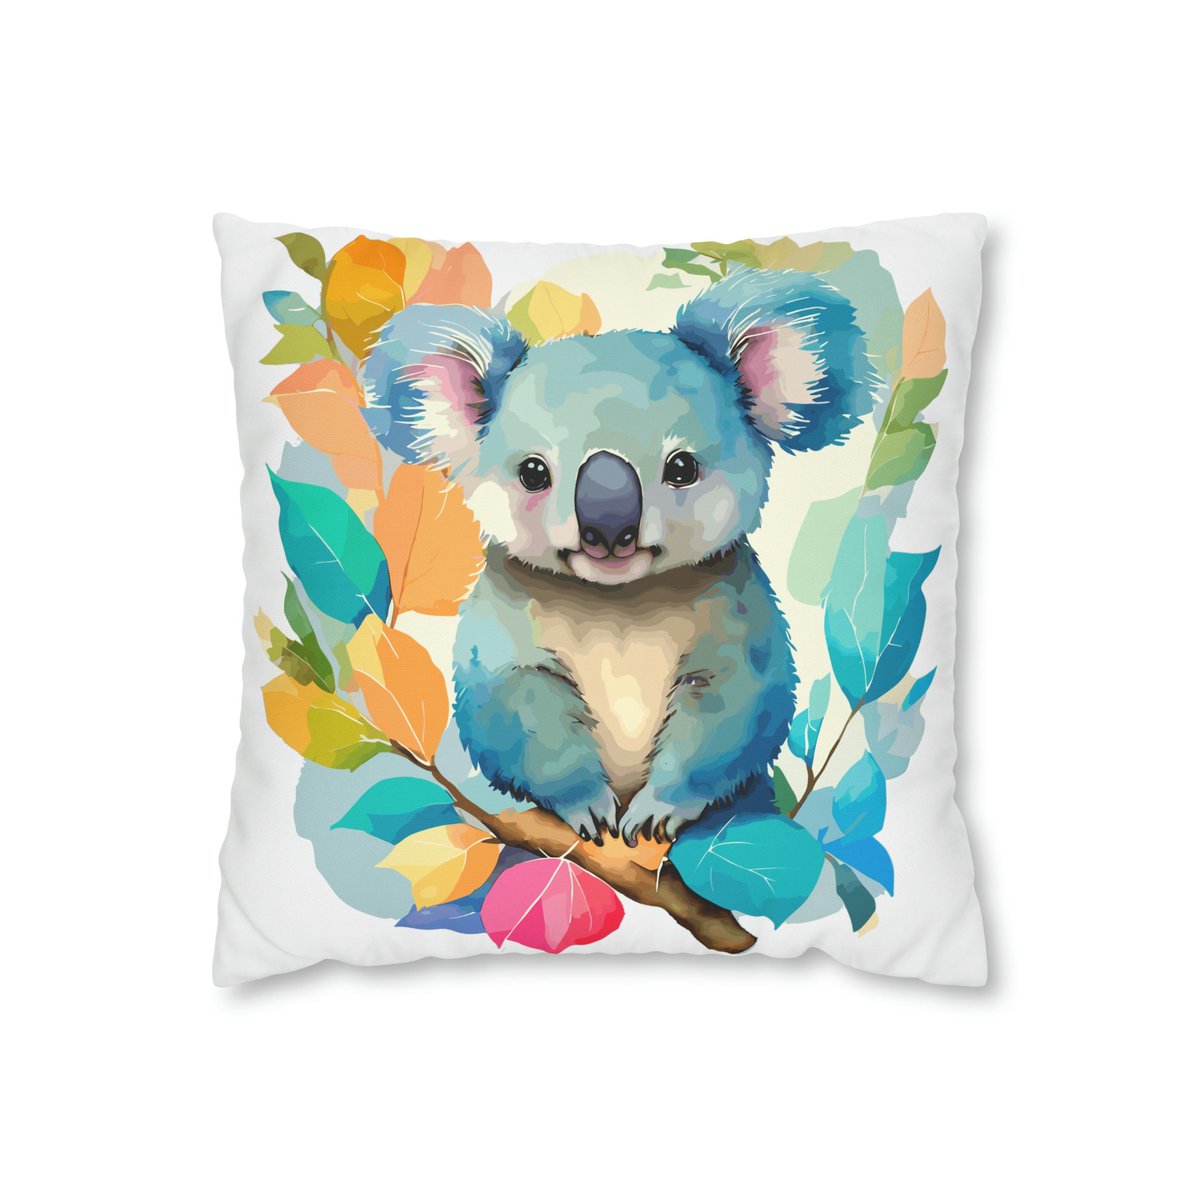 Excited to share the latest addition to my #etsy shop: Cute Koala cover, Home decor Pillowcases, Accent Pillow etsy.me/3Ay49D0 #animalprint #no #polyester #outdoorpillowcover #decorativepillows #bodypillowcover #throwcoversset #throwpillowcover #homedecor